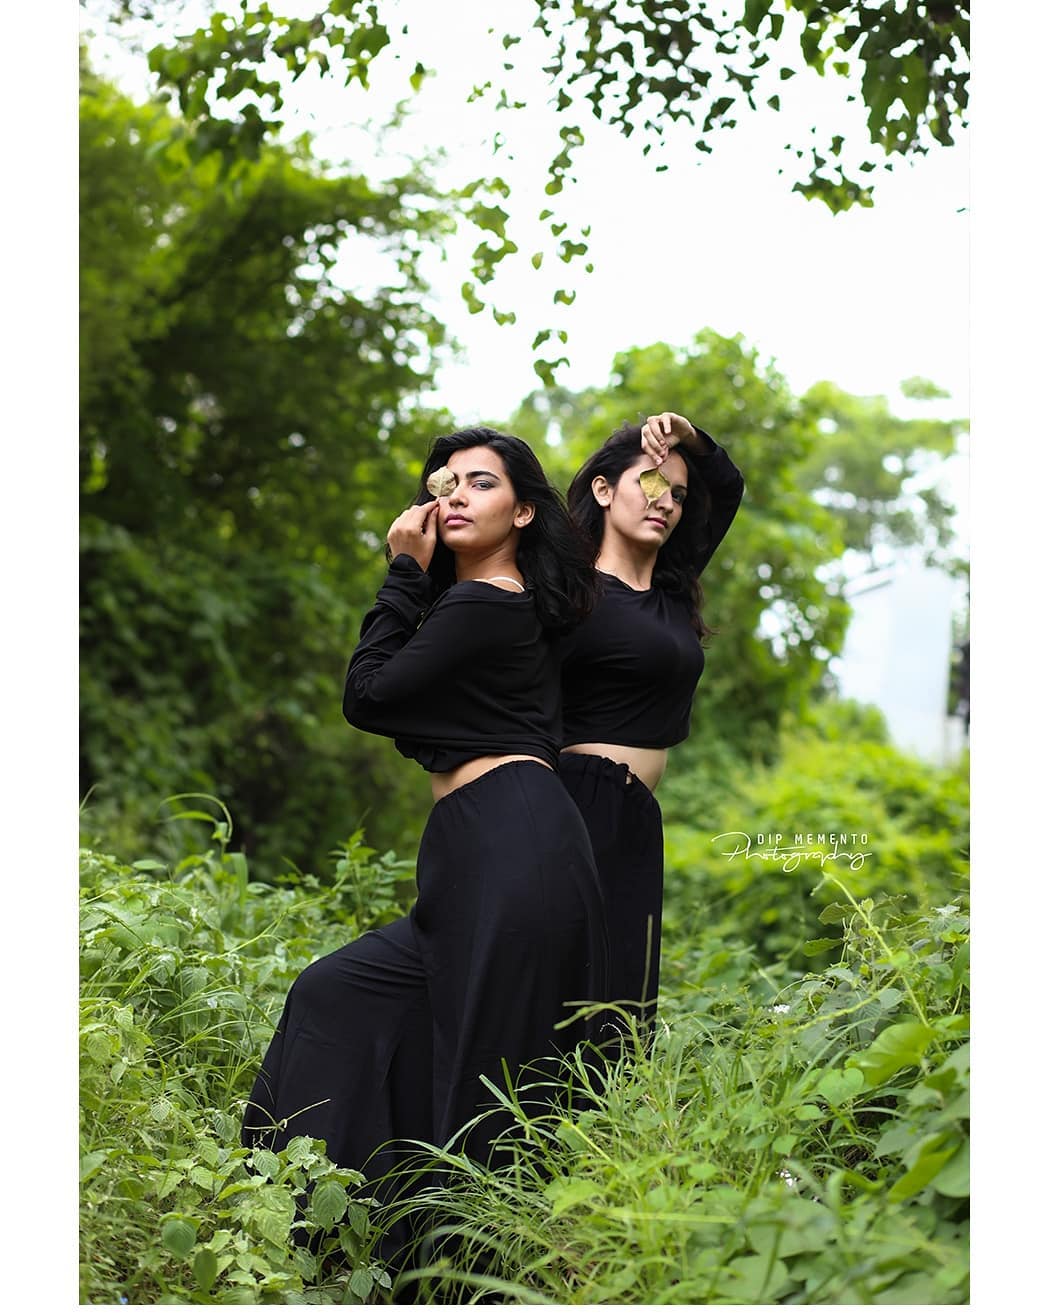 Confidence is not “I’m Better than Her”
Confidence is “I’m Great, so She is”..
.
.

InFrame : 🍂Komal & 🍃Riddhi
.
.
Dance with Nature Concept Shoot.

Shoot By: @dip_memento_photography, ---------------*--------------*----------------*---------------*---------
#streetshoot #streetclassicalshoot #streetconceptshoot #conceptshoot #conceptphotoshoot #ahmedabad #dipmementophotography 
#dslrofficial  #dance #photooftheday #portraitsofficial #50mm  #picoftheday  #girl #indiafeature #keeptagging #9924227745 #_ip #_ig  #bestoftheday #danceshoot #naturelovers
#indiaportraits #indiaportraits #sun #keepdancing